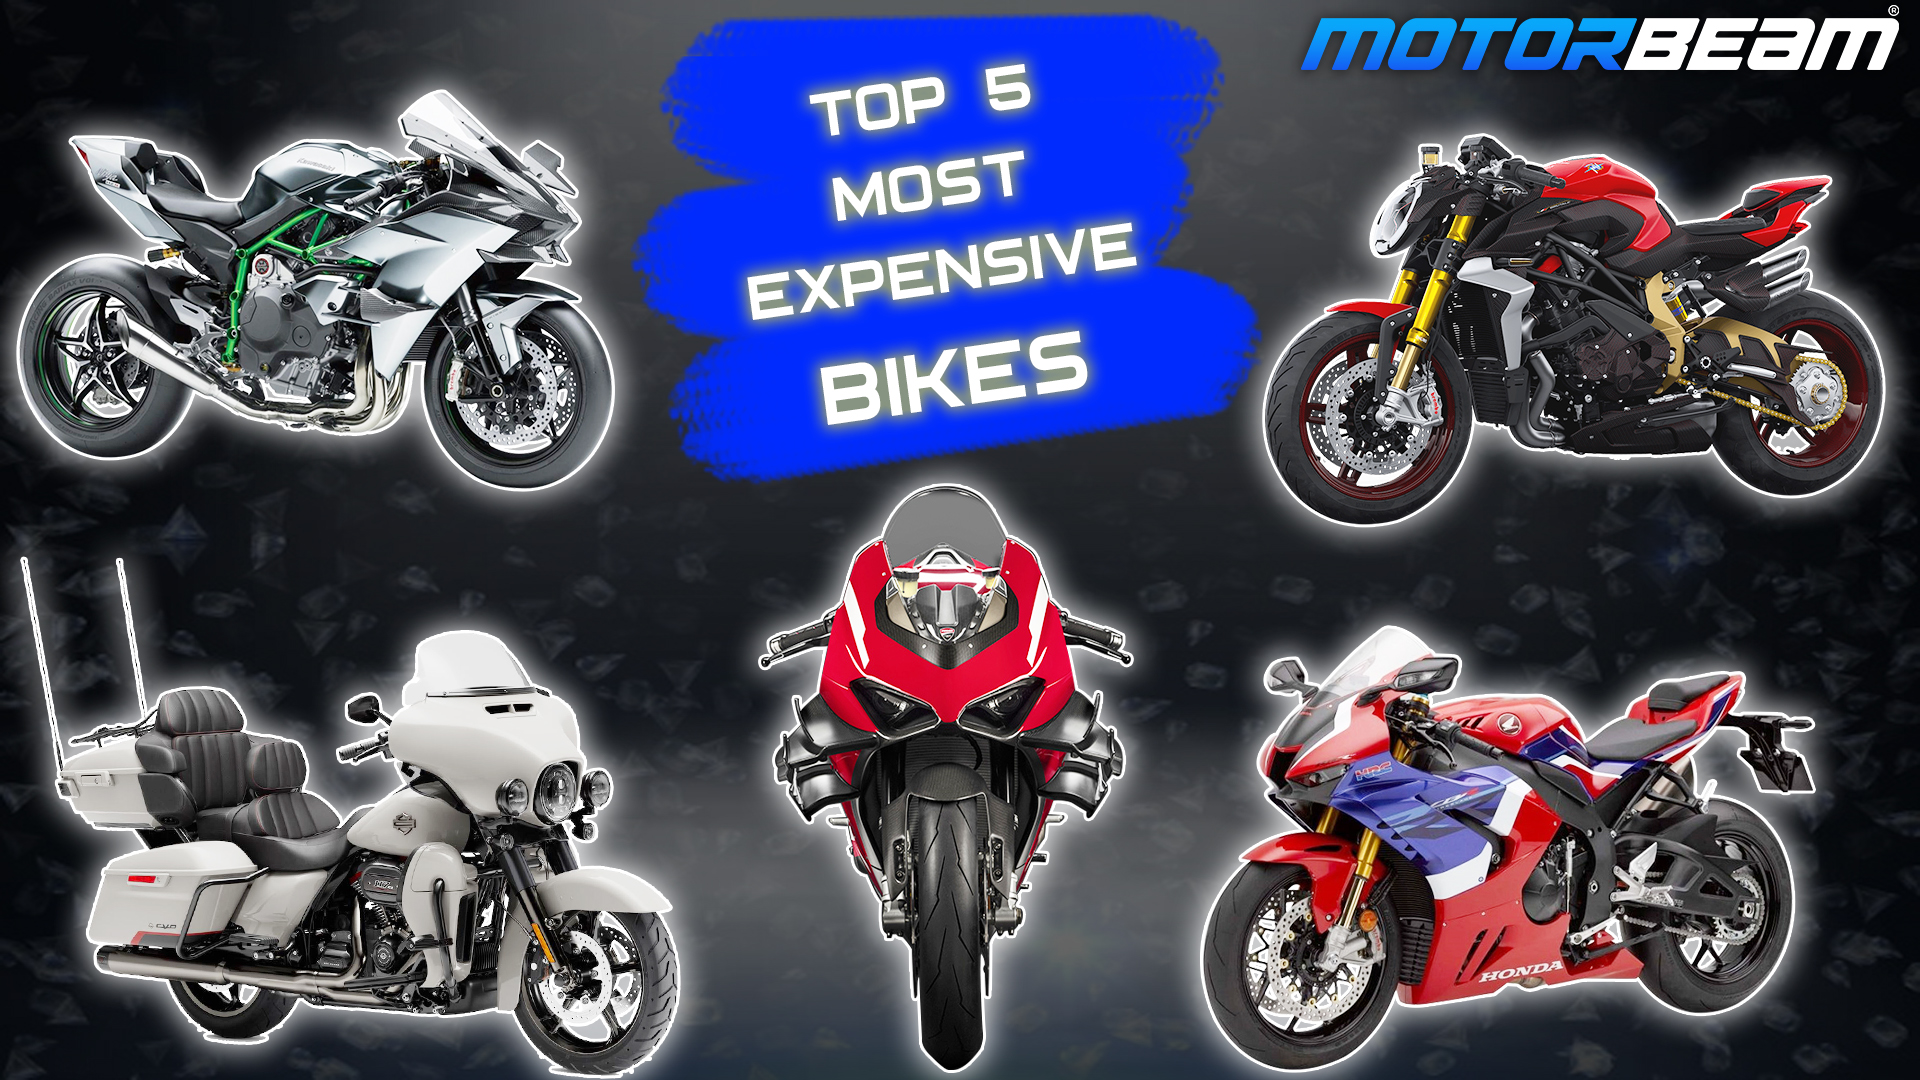 Top 5 Most Expensive Bikes Video